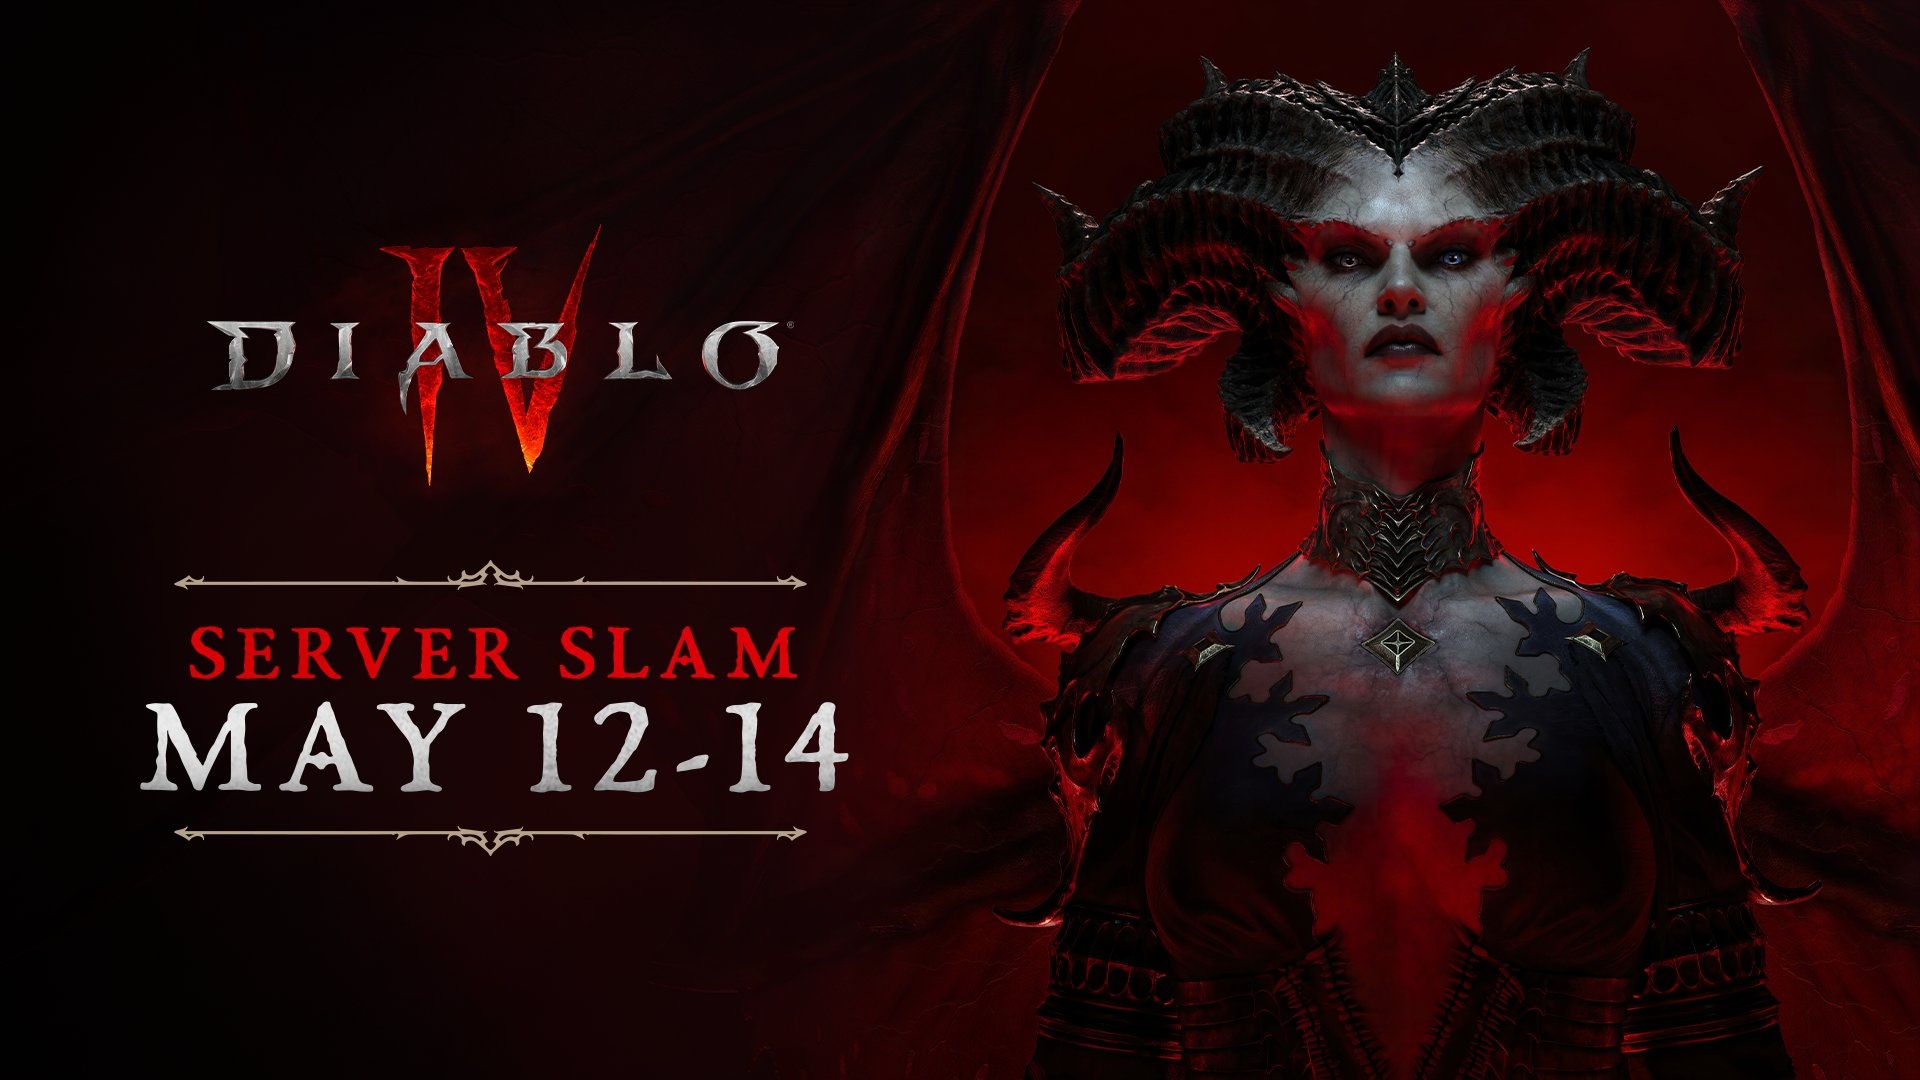 Diablo IV announces a new test open to all from May 12 to 14